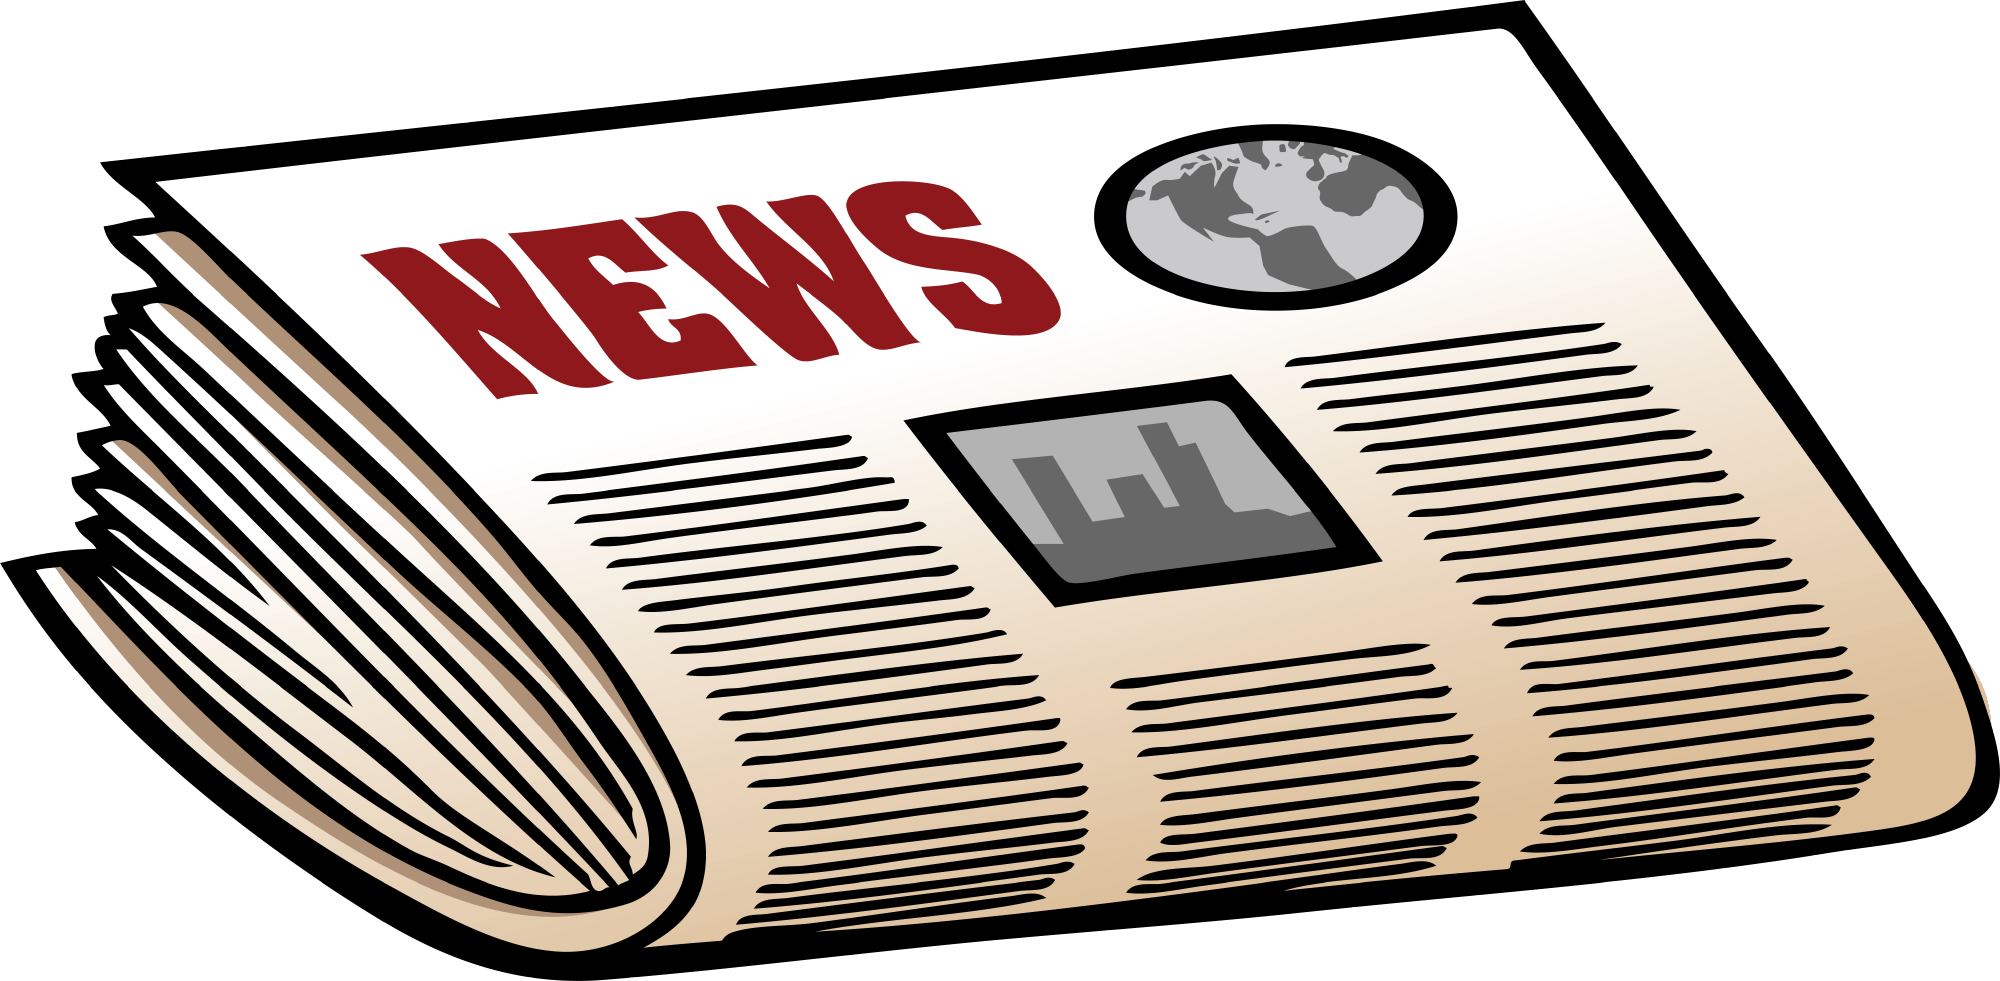 This Is The Image For The News Article Titled Fresh - Newspaper Clipart Png (2000x981)